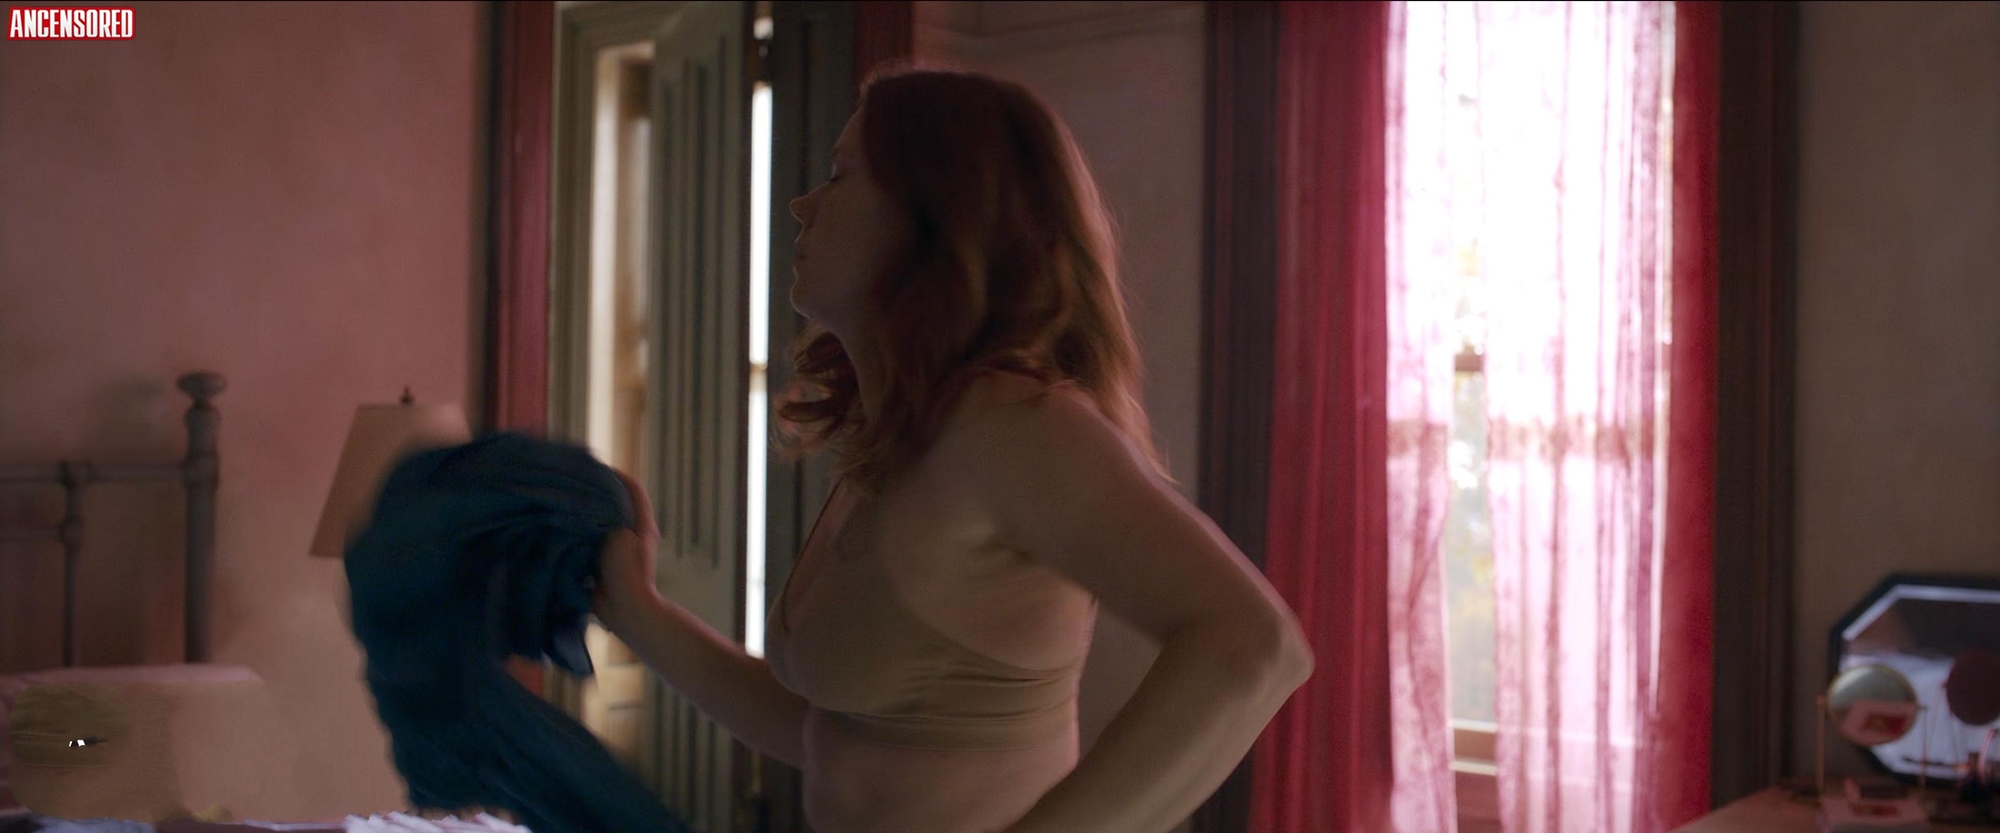 Naked Amy Adams in The Woman in the Windowu003c ANCENSORED image